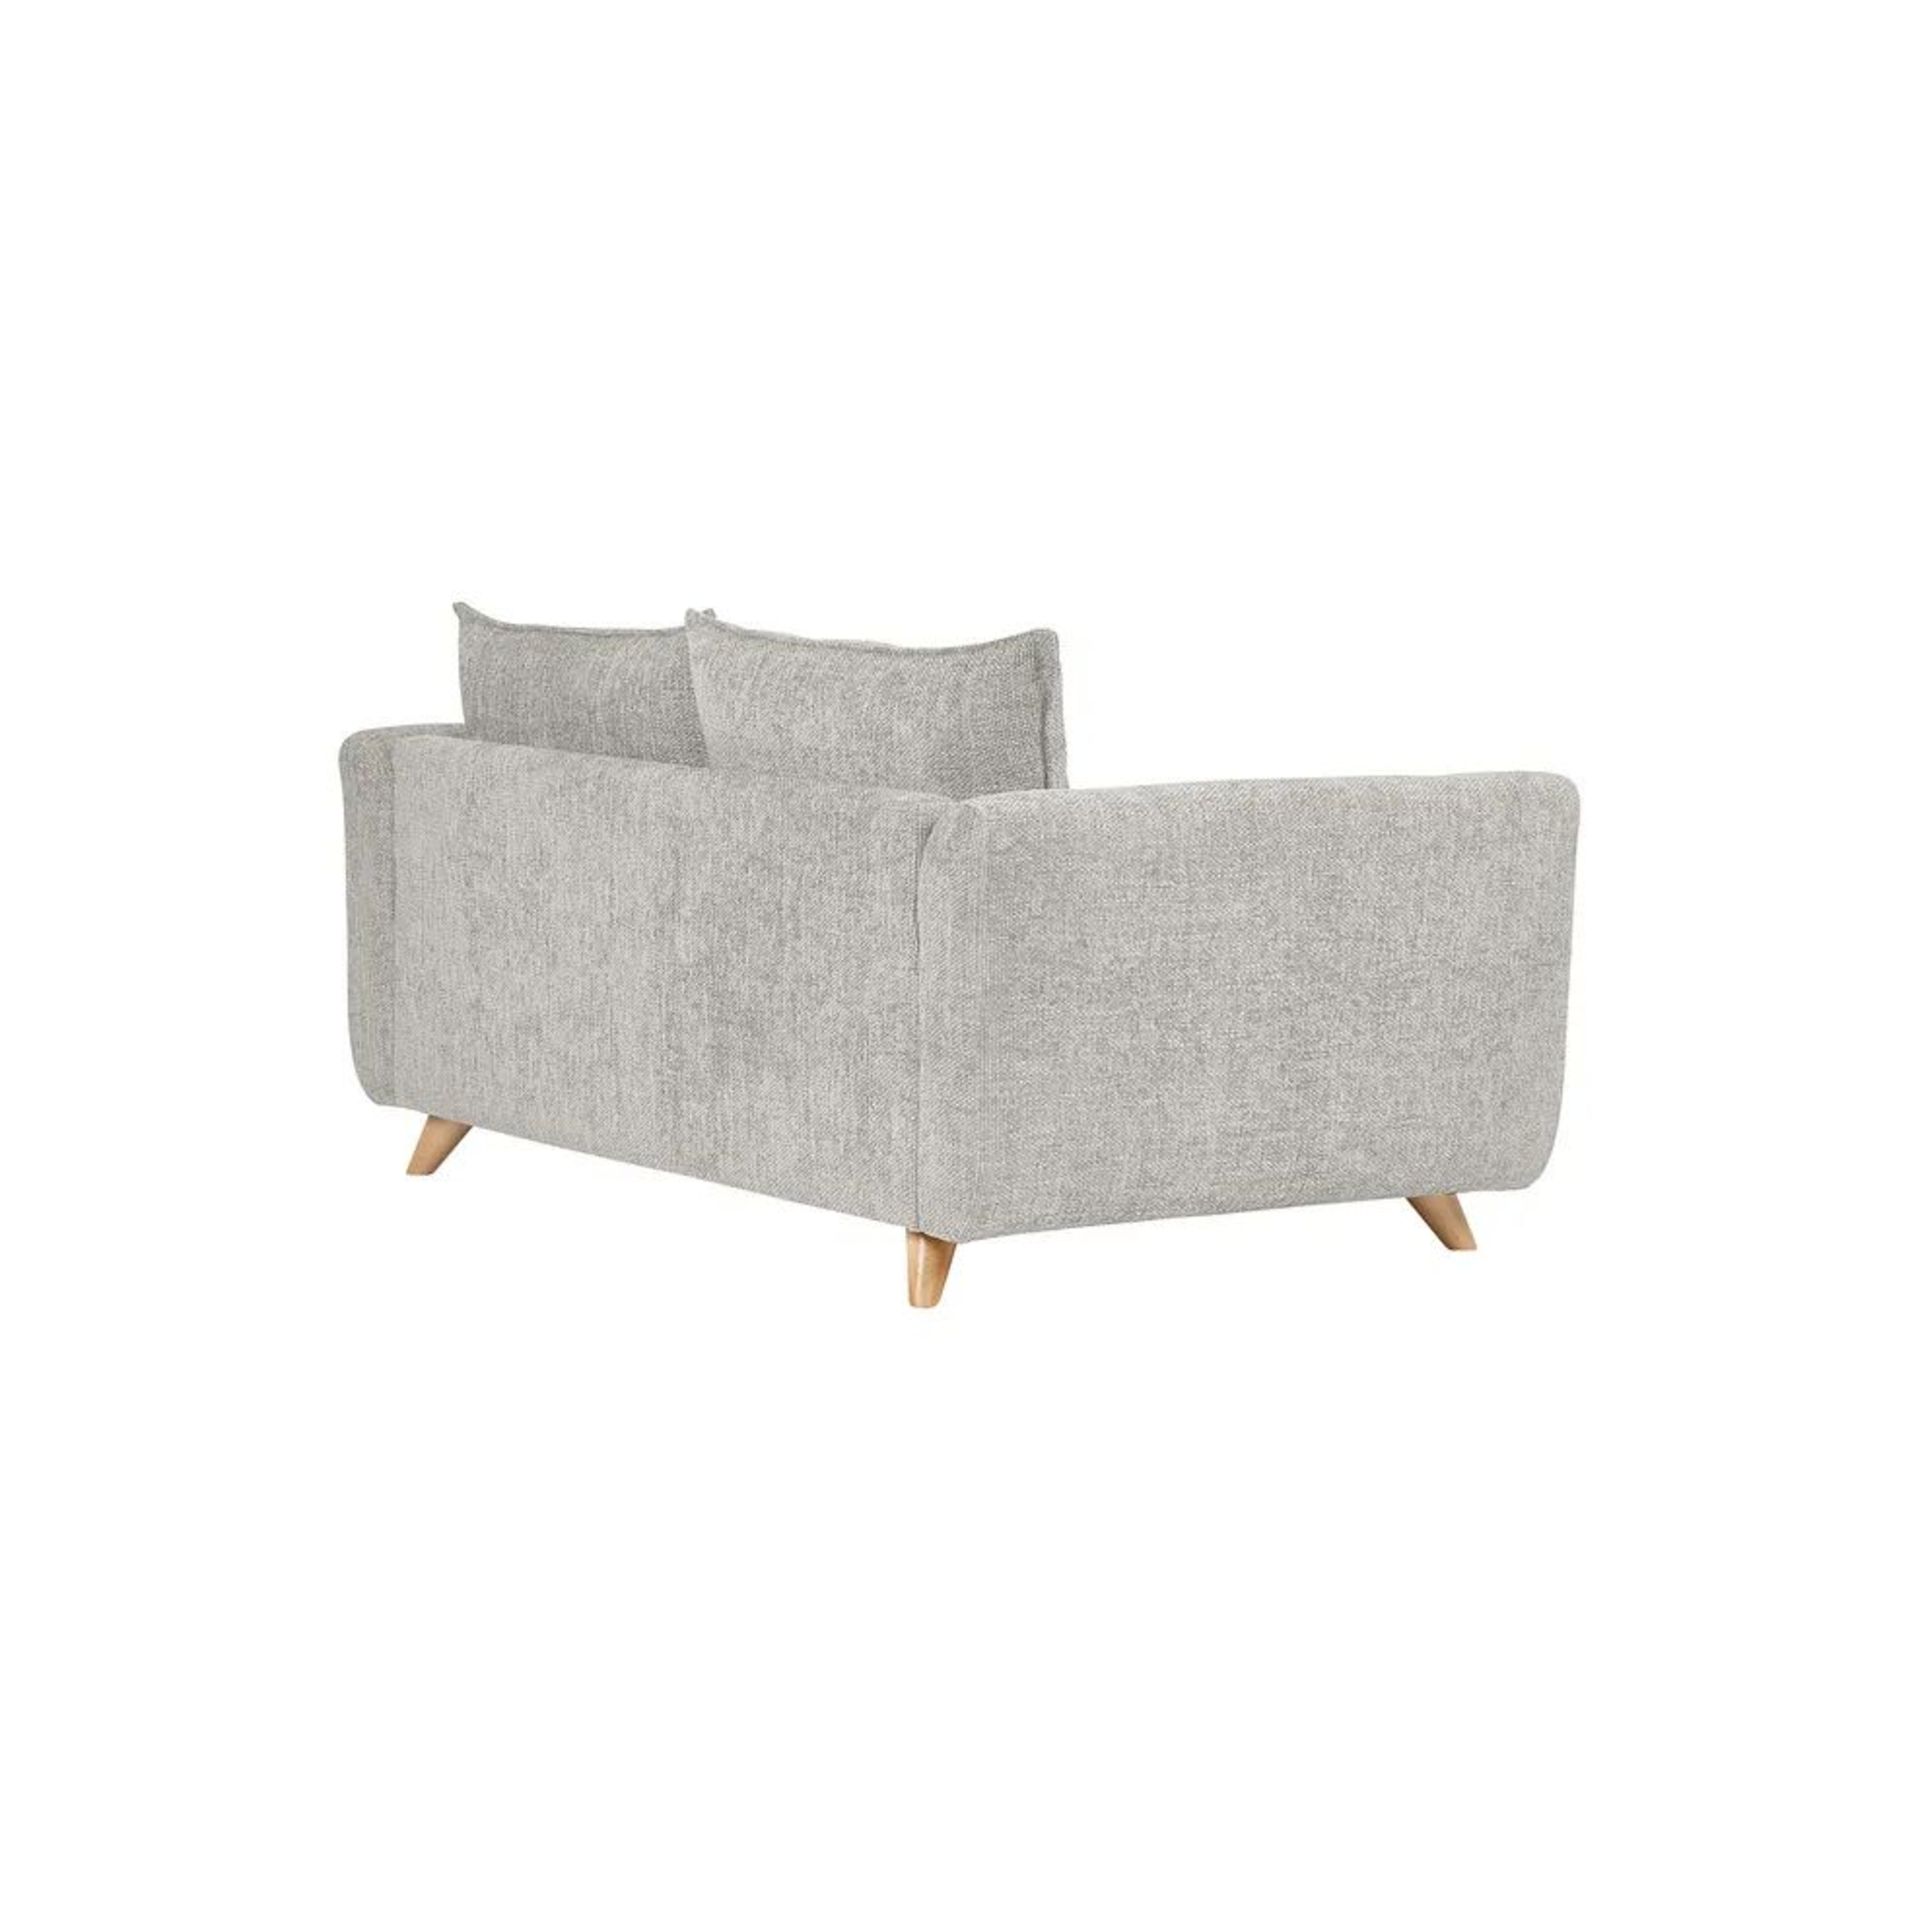 BRAND NEW DALBY 3 Seater Sofa - SILVER FABRIC. RRP £1679. Our Dalby 3-seater sofa, shown here in - Image 3 of 8